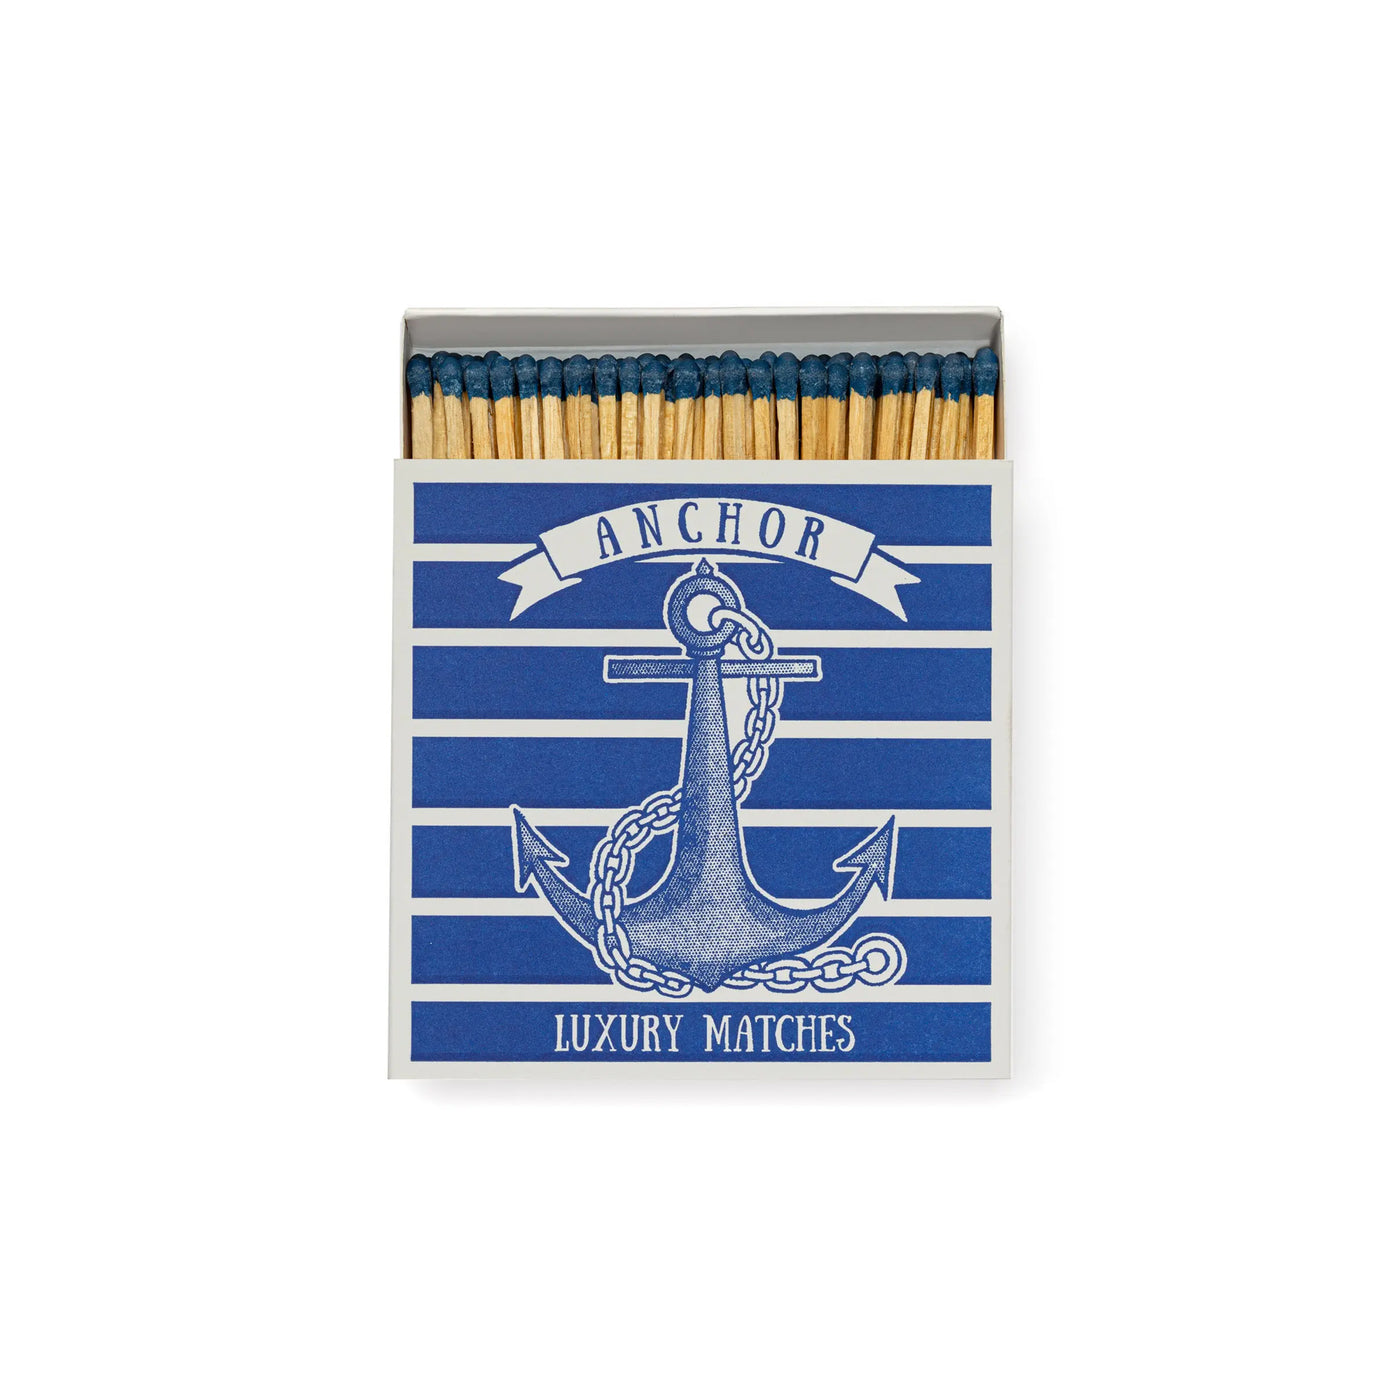 Anchor Matches by Archivist Gallery